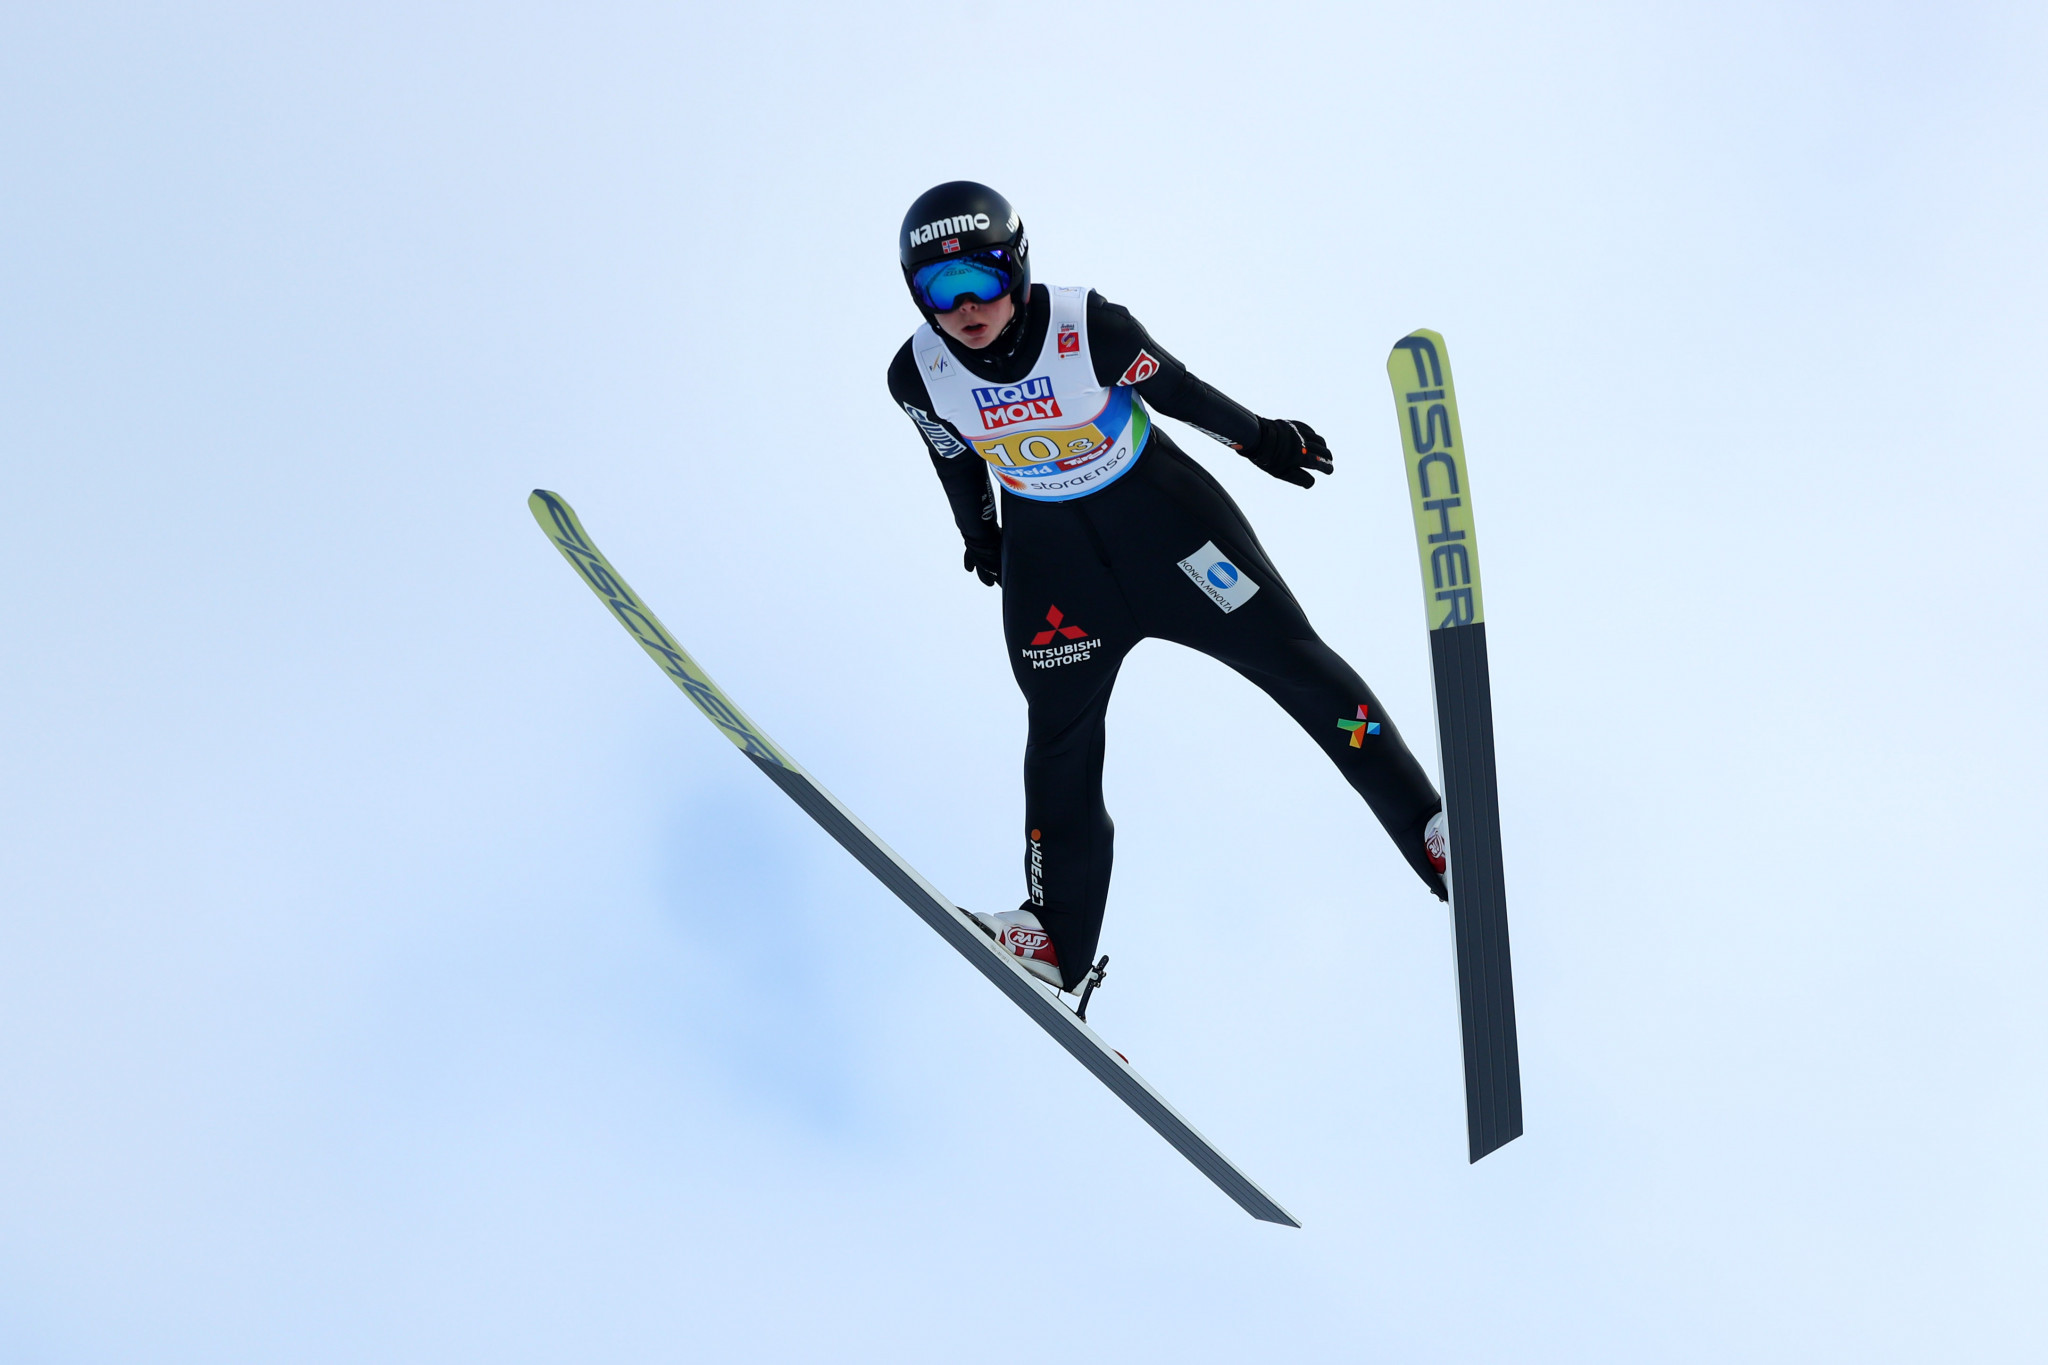 Lillehammer ready for women's FIS Ski Jumping World Cup